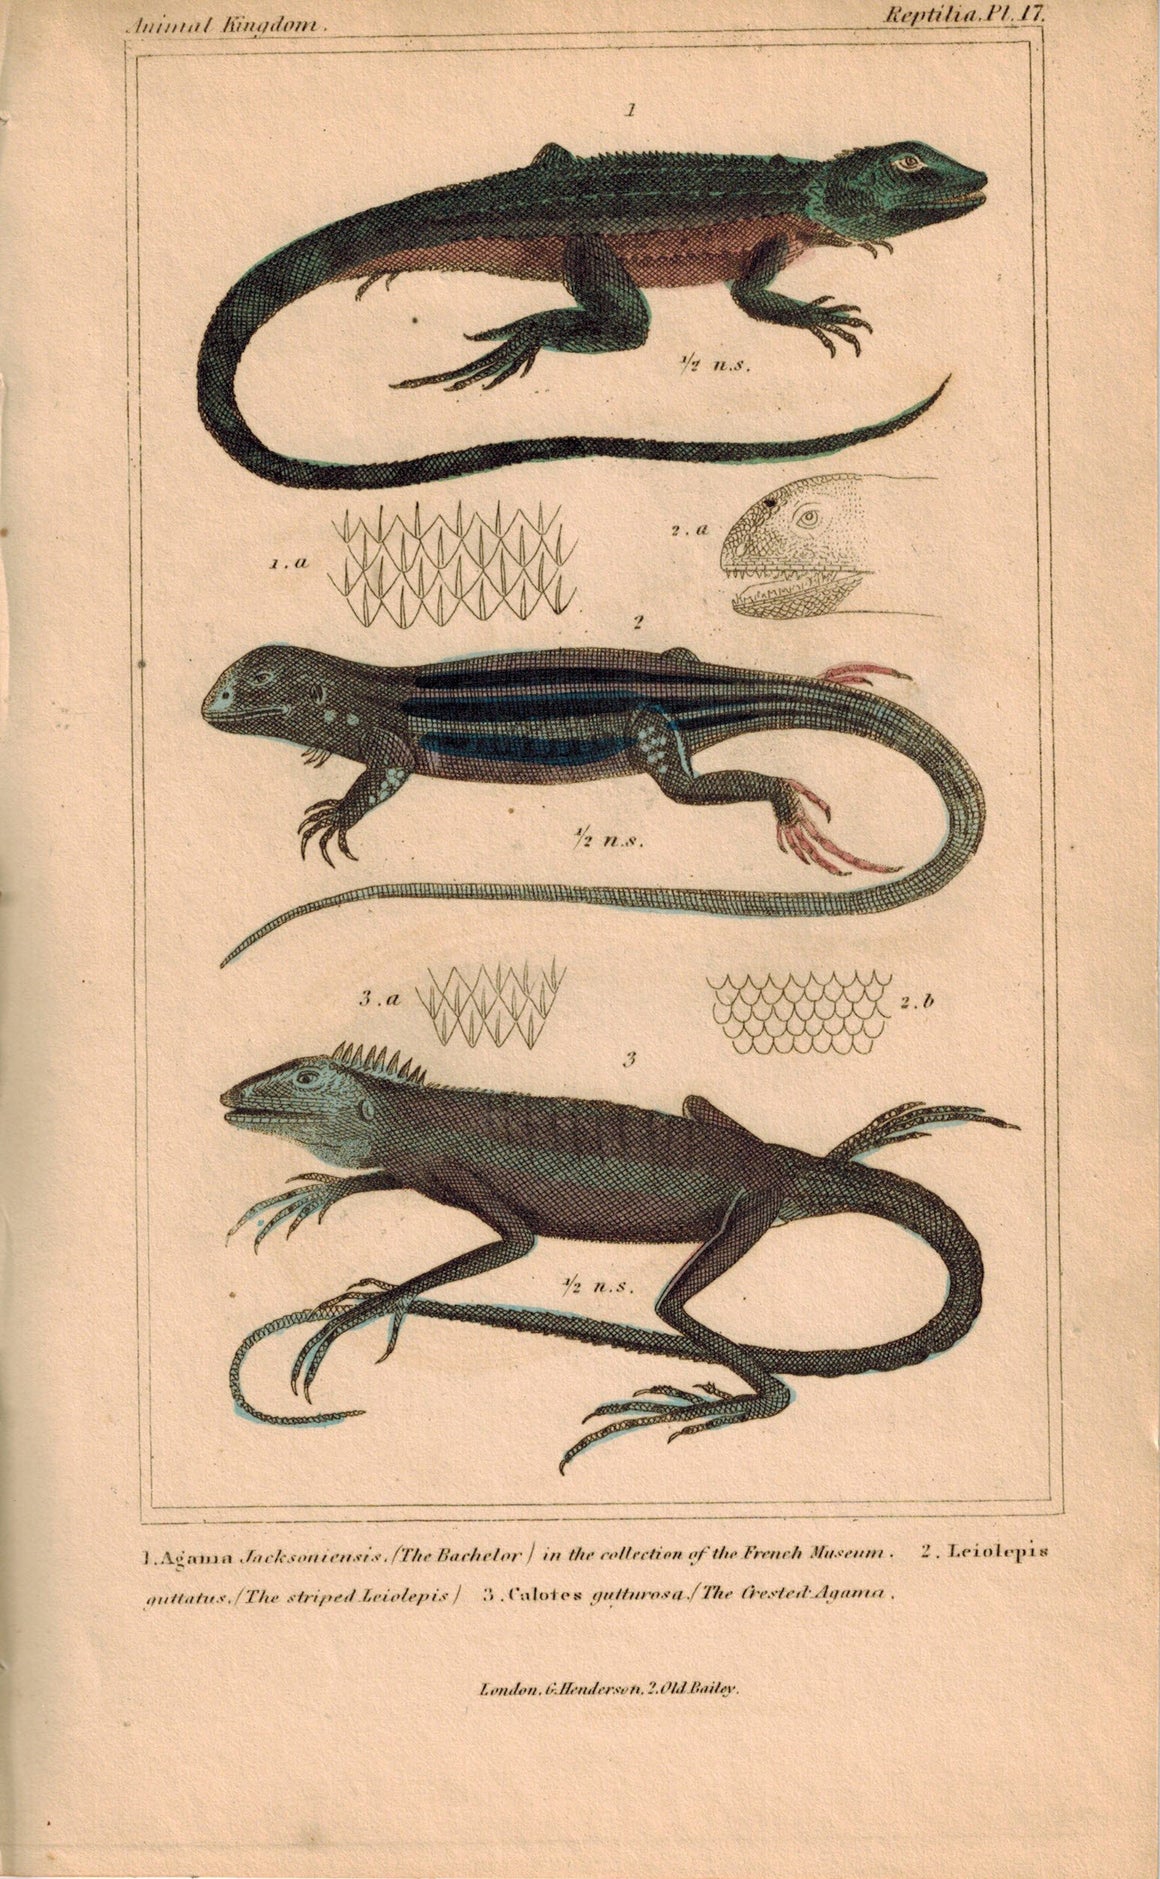 Bachelor Leiolepis Agama Lizards 1834 Engraved Cuvier Reptile Print Plate 17